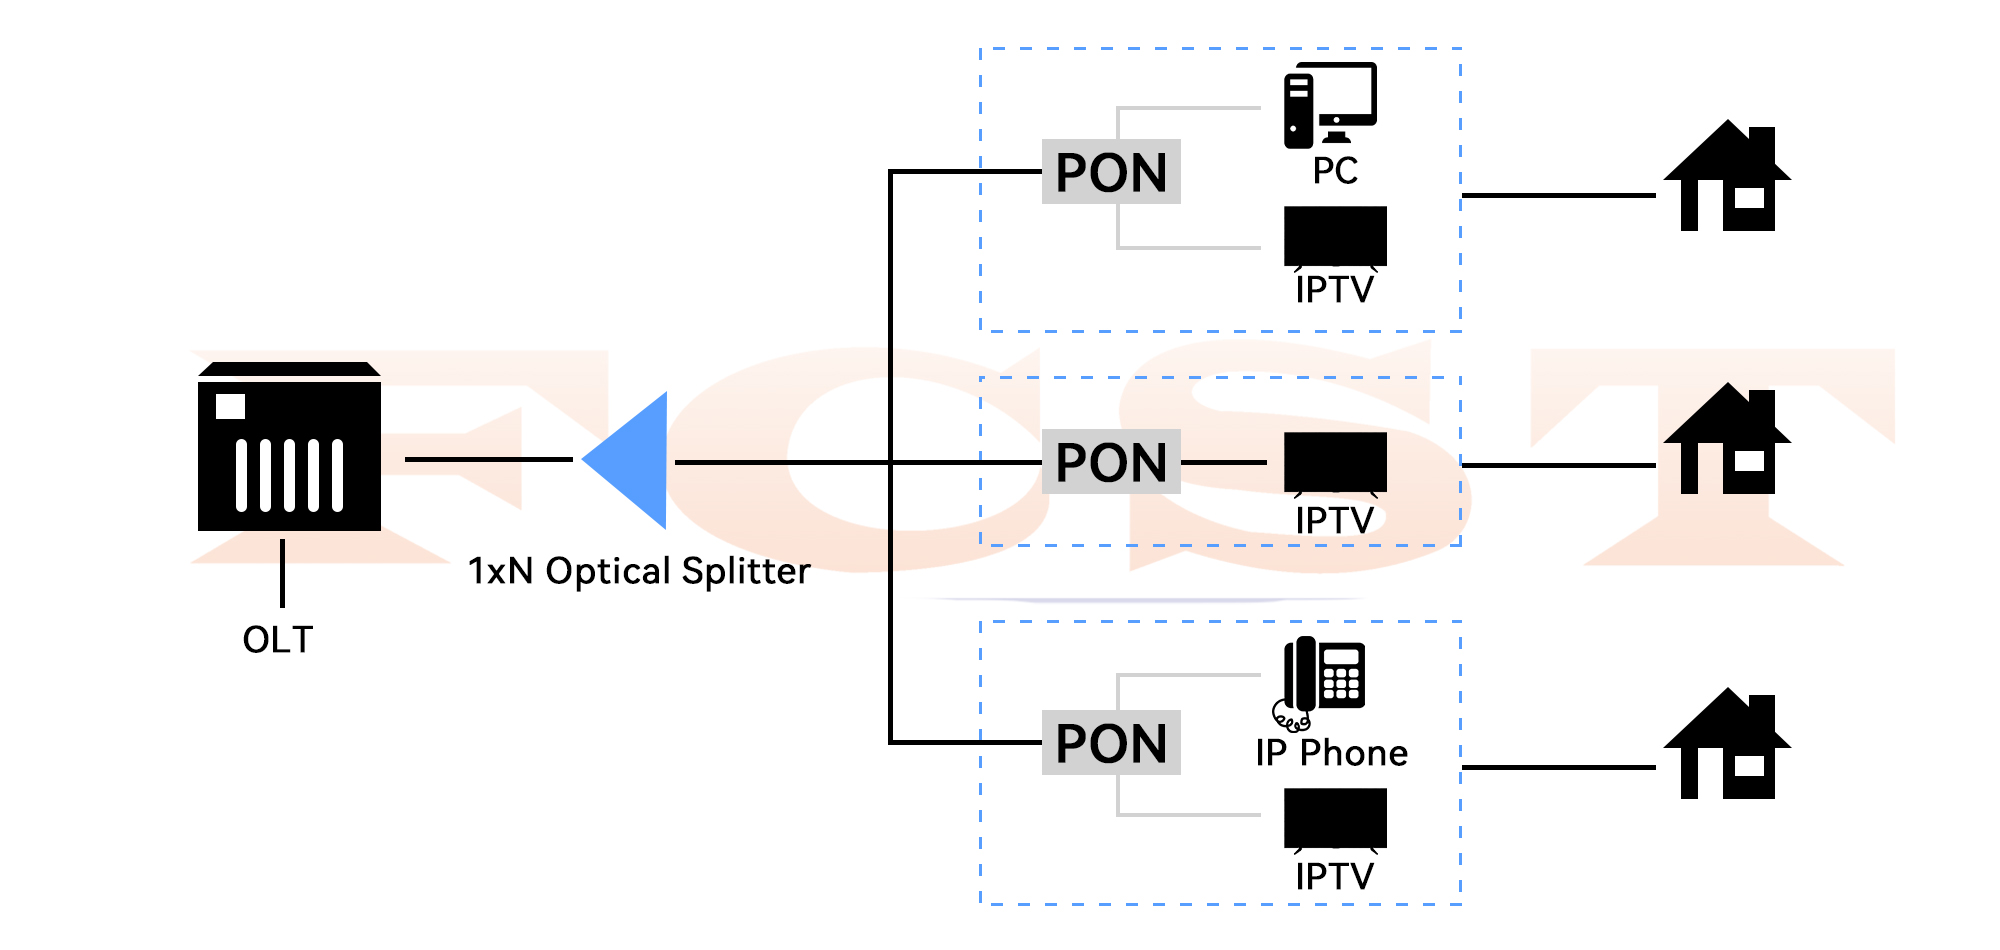 Application of Optical Splitter in PON Network-Comparison of Centralized Distribution and Cascaded Distributi